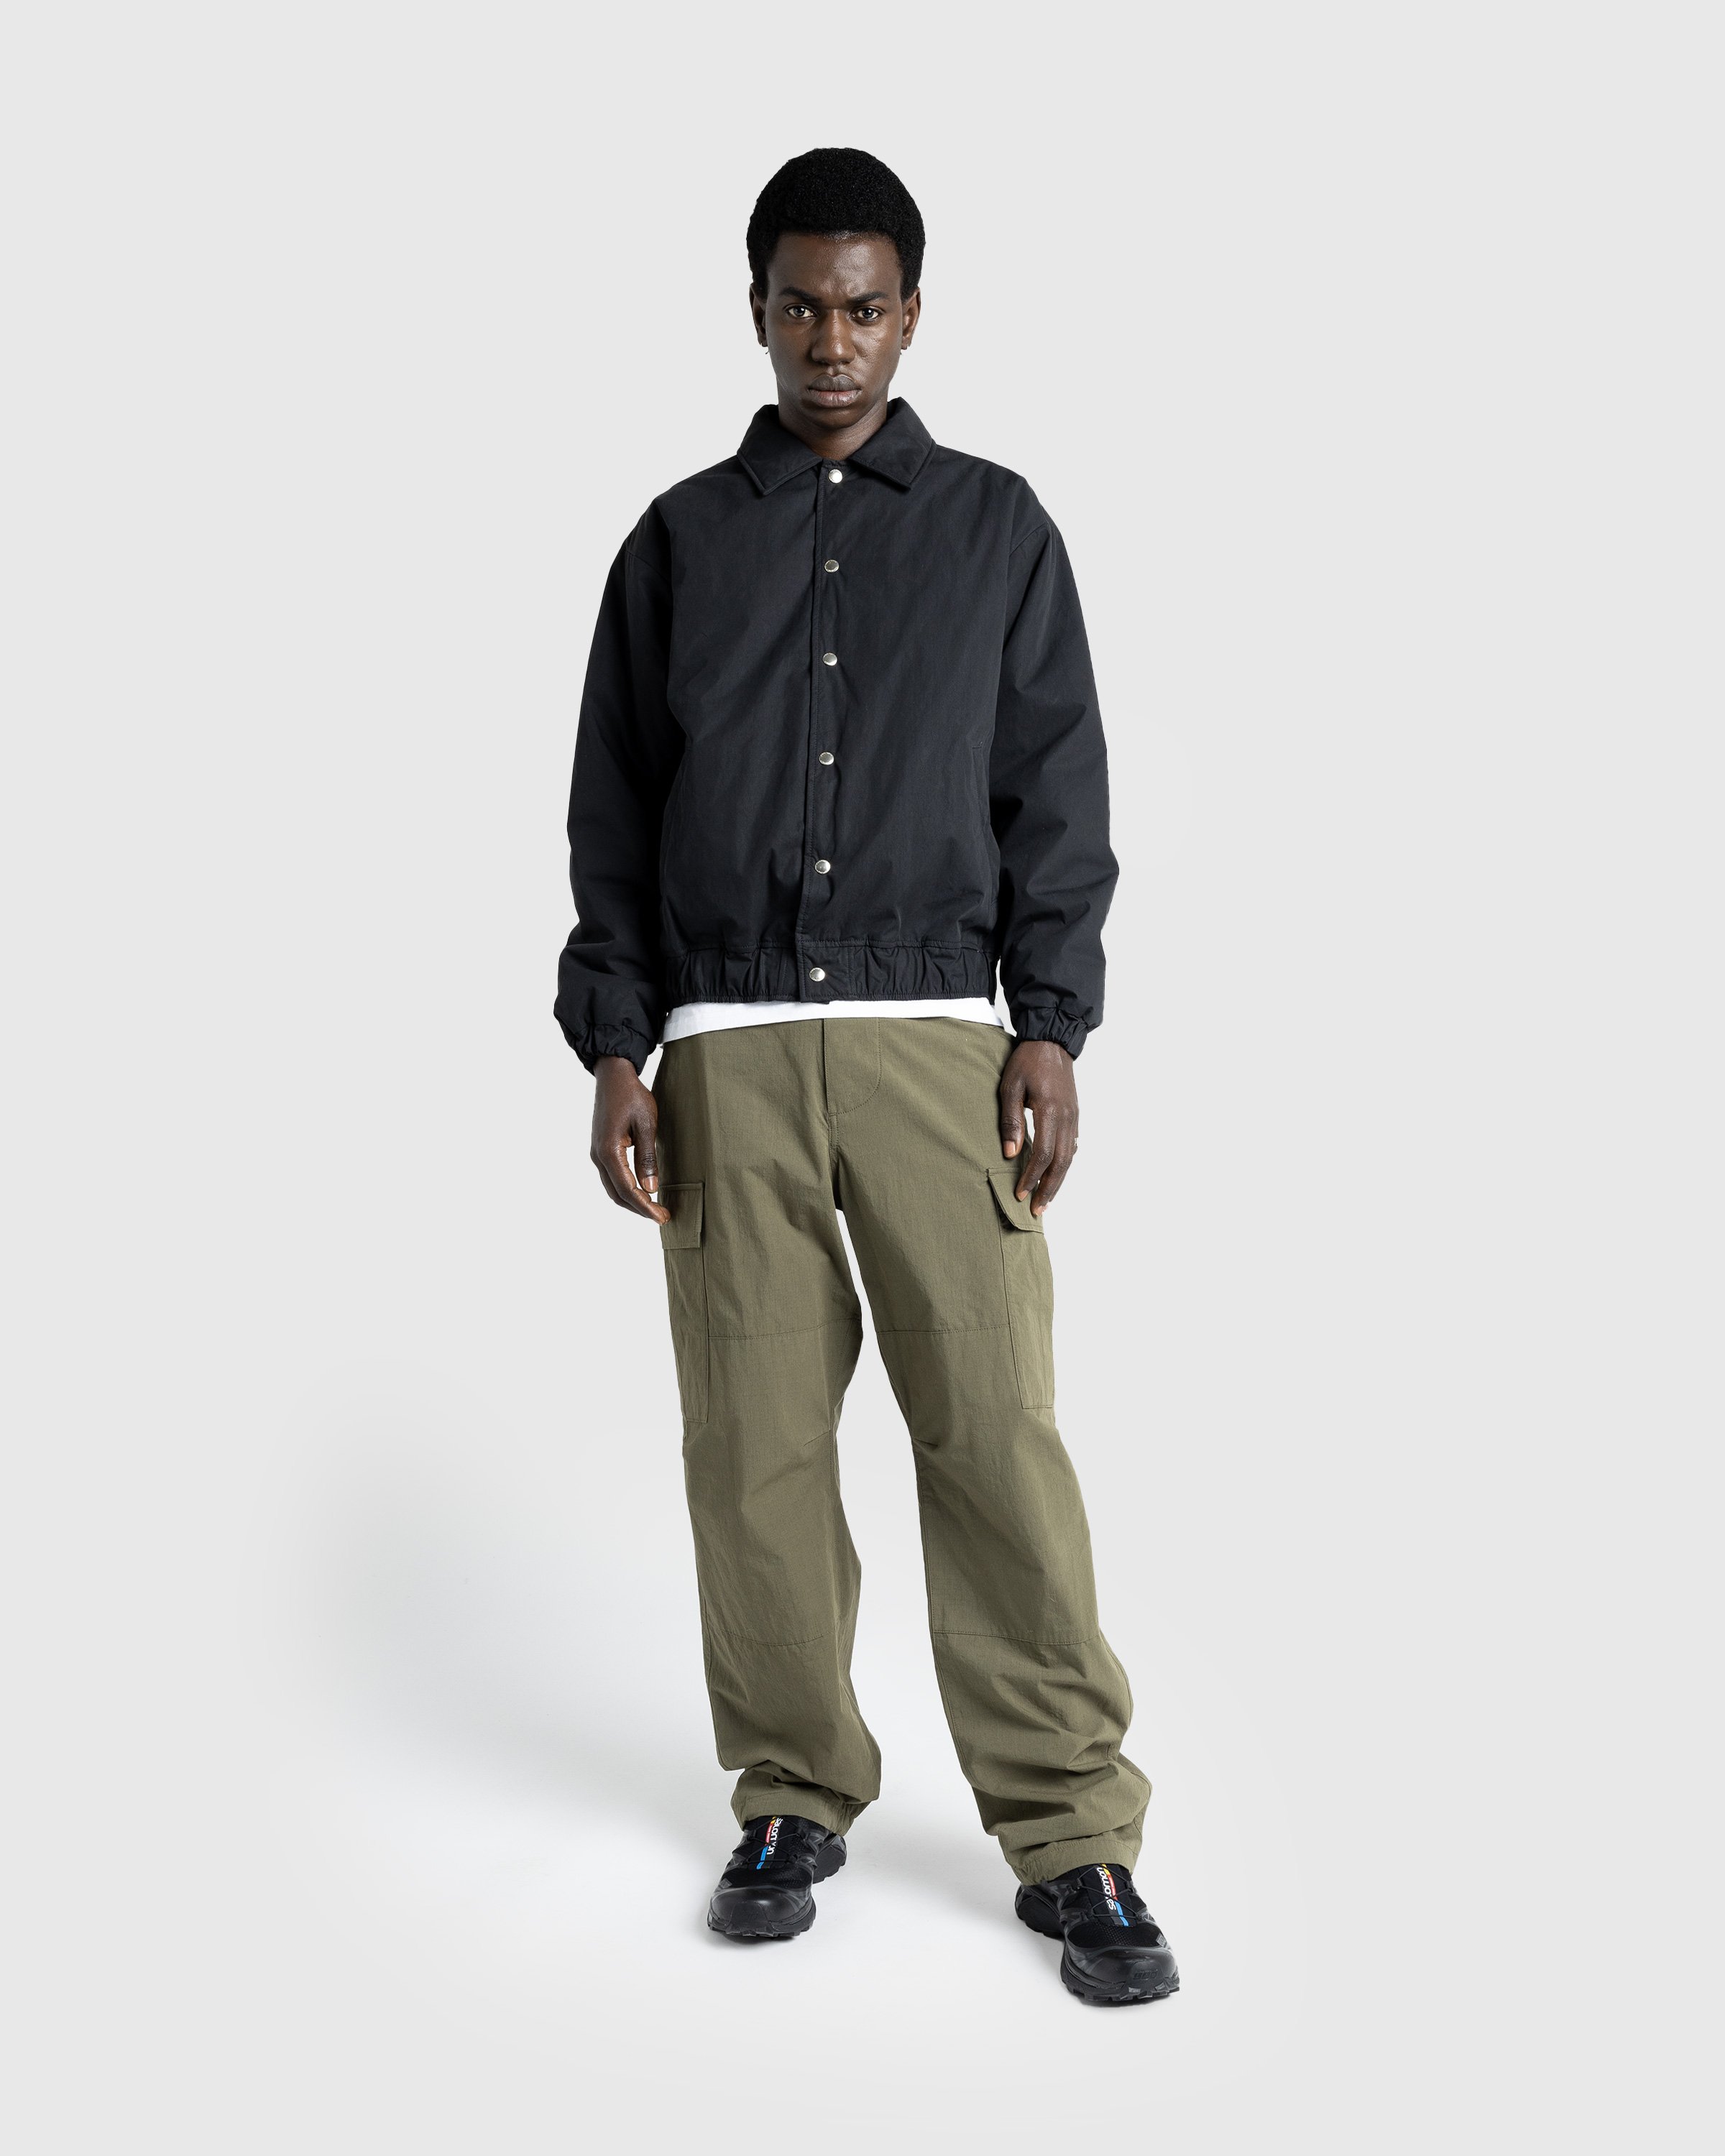 Highsnobiety HS05 - Reverse Piping Insulated Bomber - Clothing - Black - Image 4